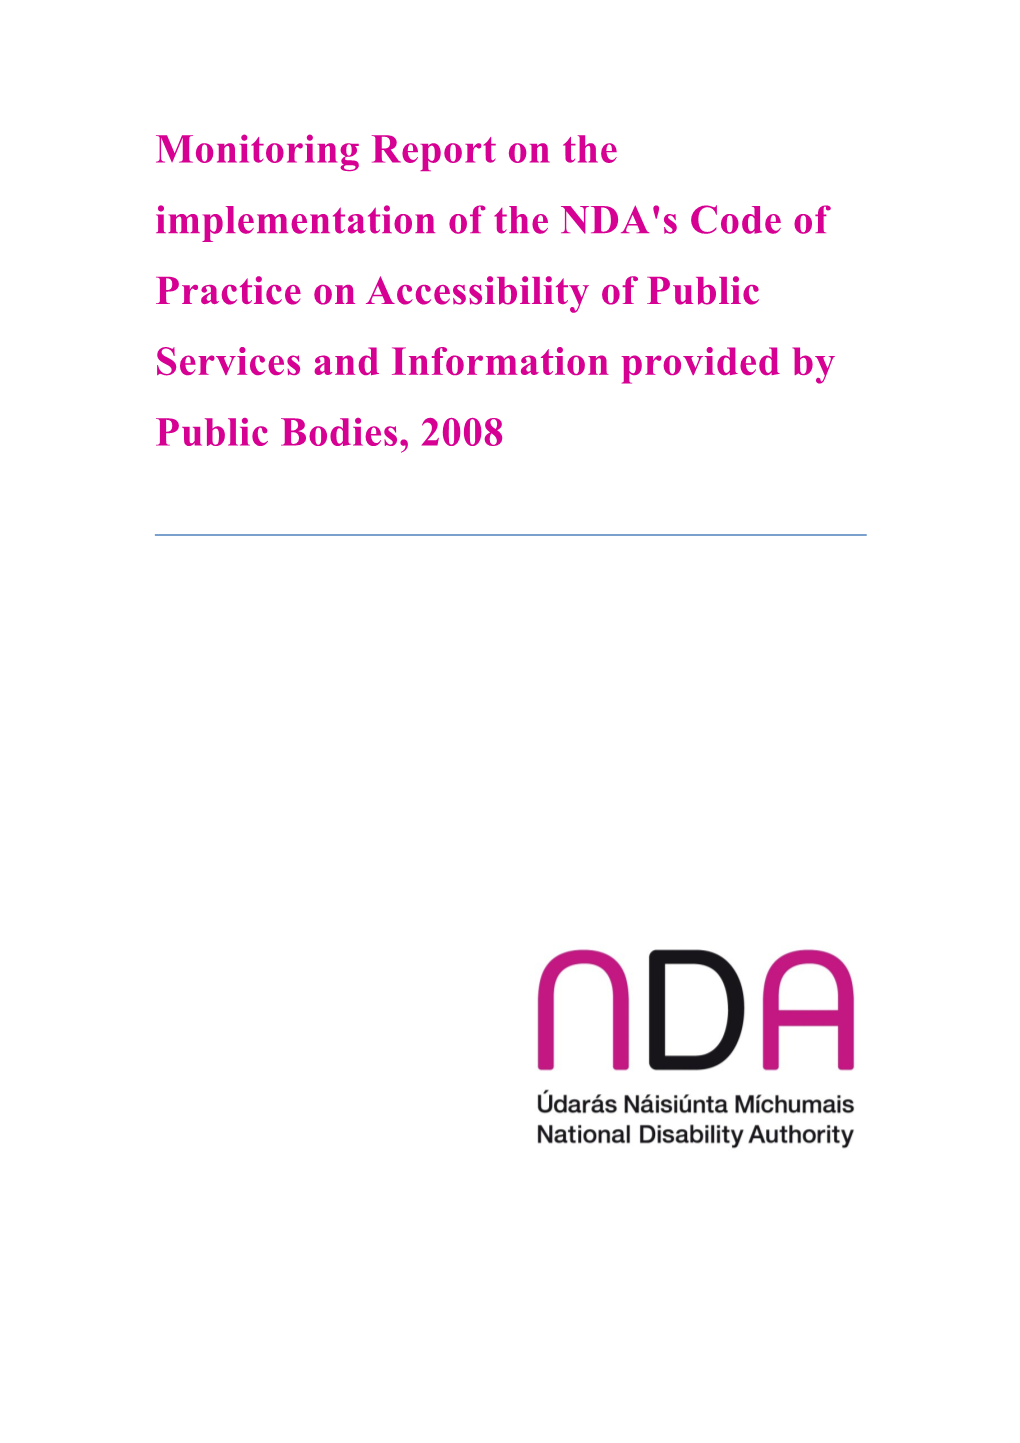 Monitoring Report on the Implementation of the NDA's Code of Practice on Accessibility